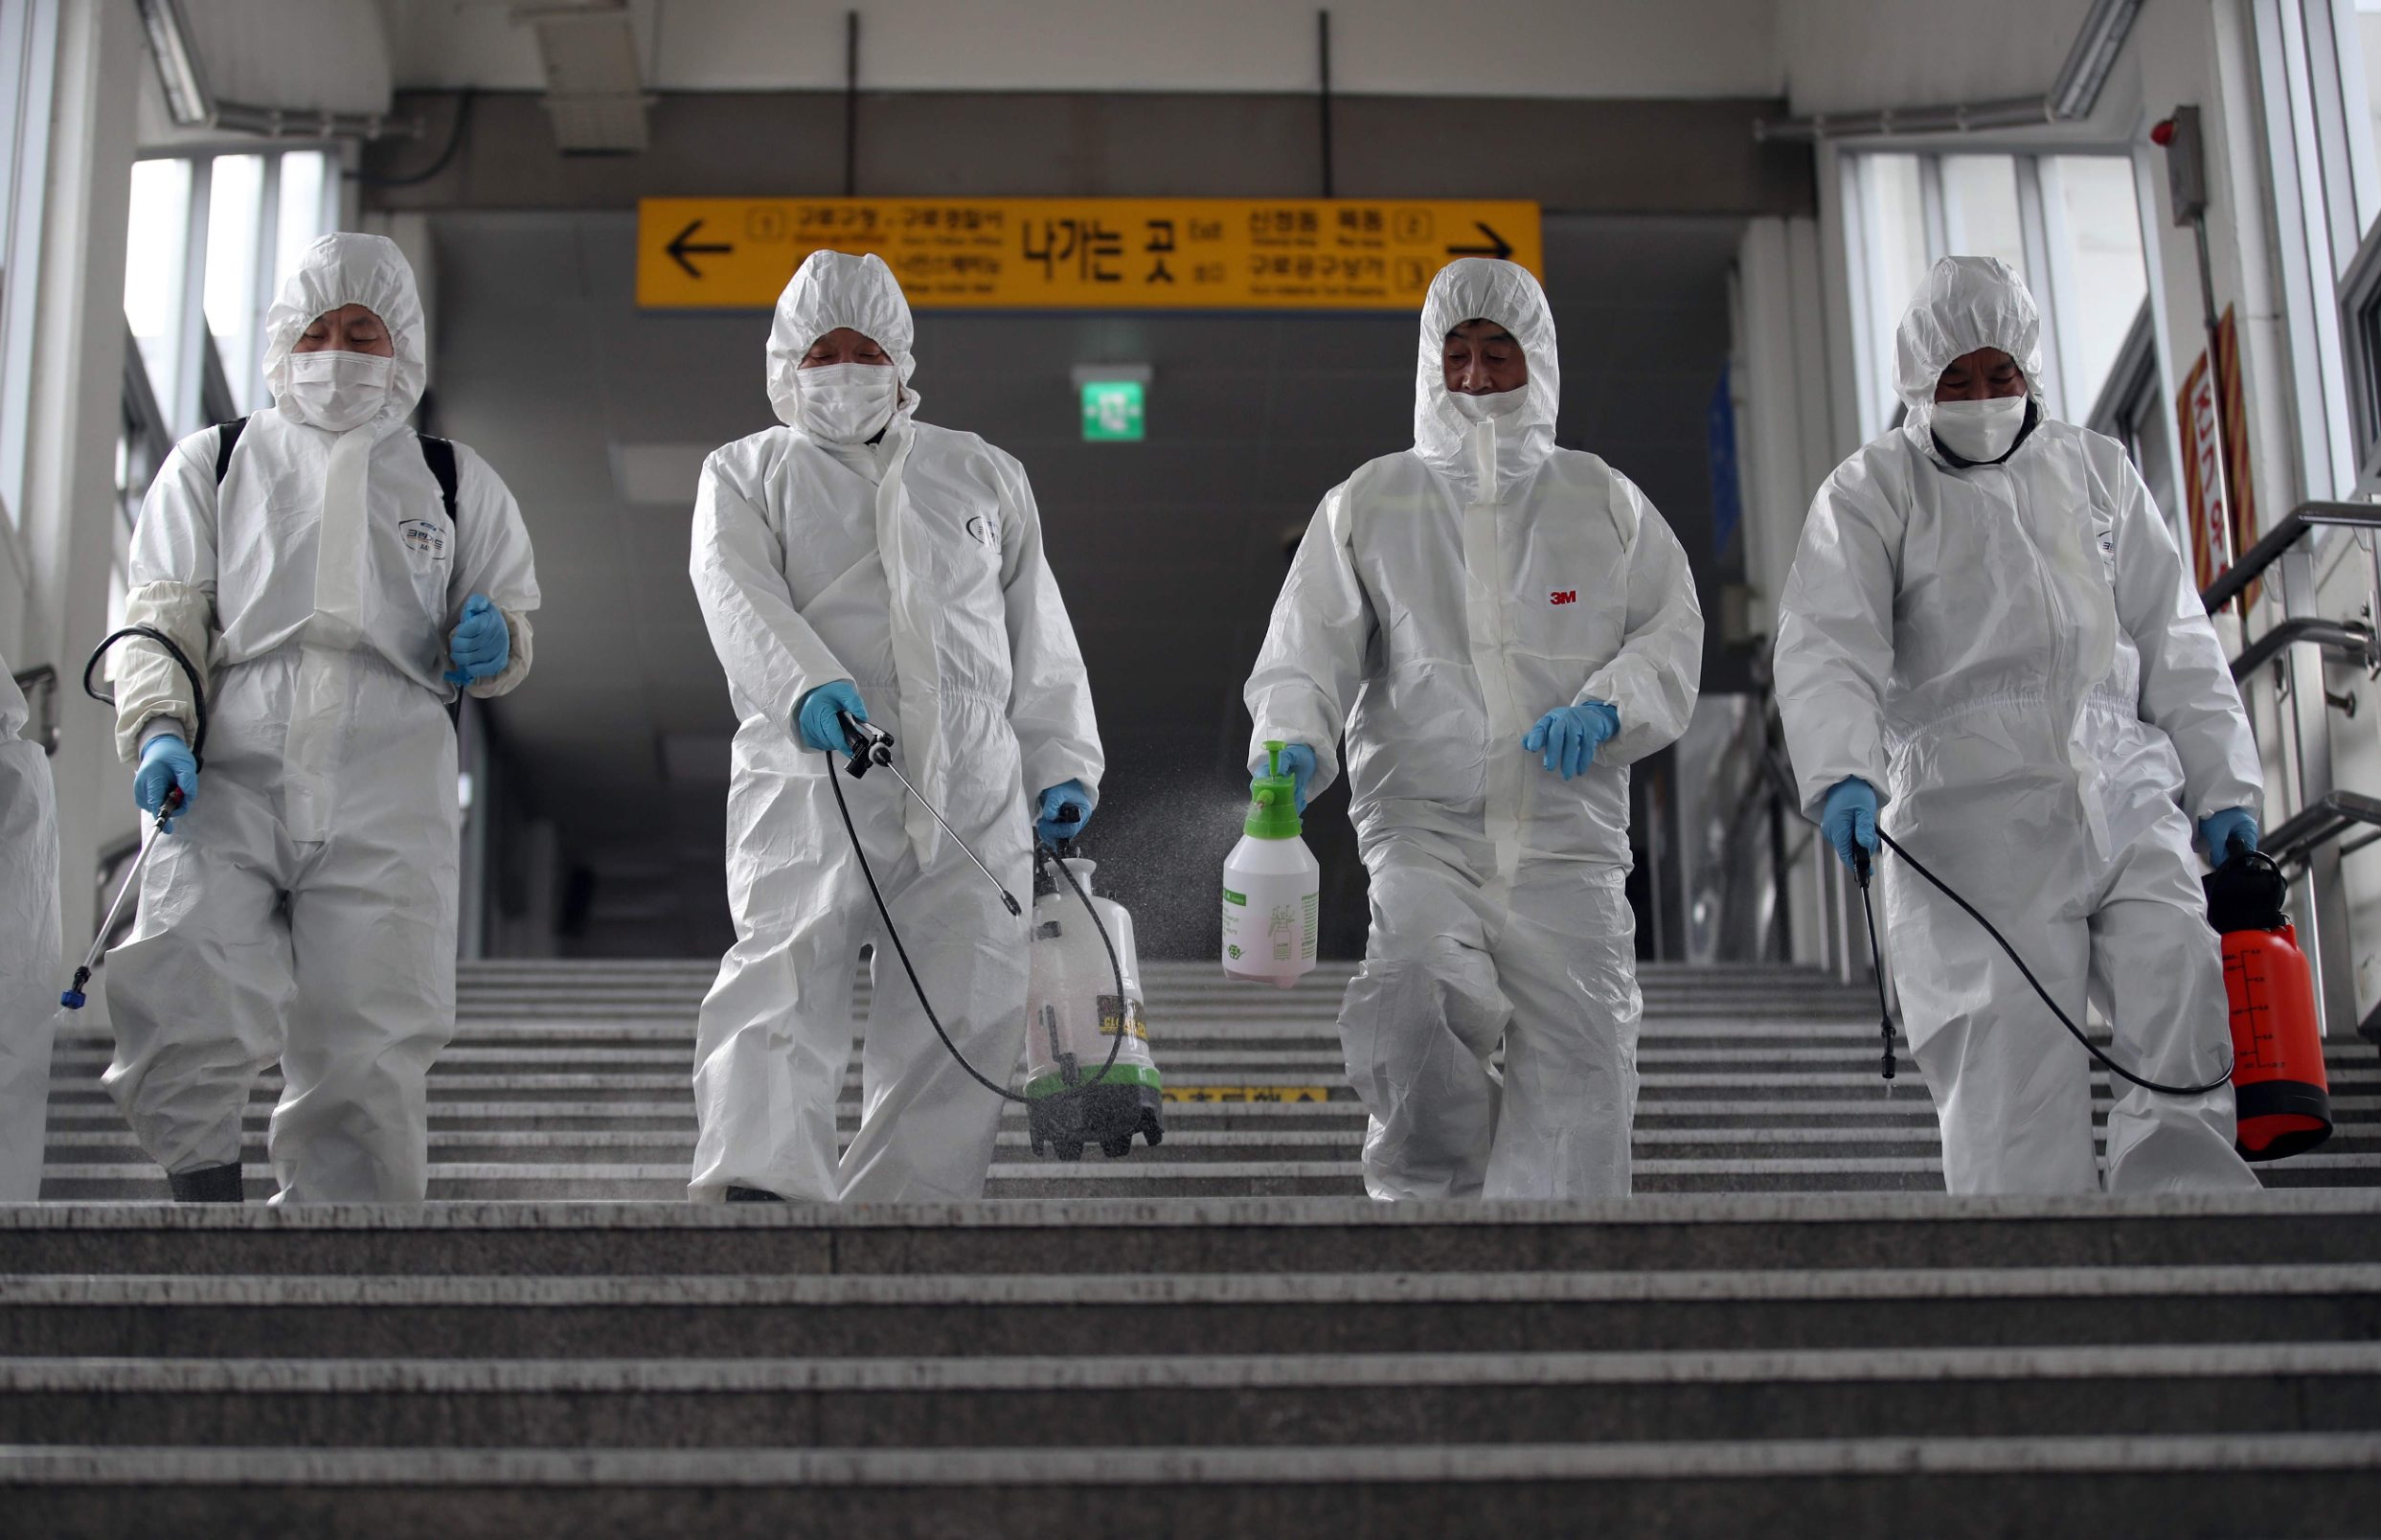 Workers wearing protective gear spray disinfectant to help prevent the spread of the COVID-19 coronavirus, at a subway station in Seoul on March 12, 2020. - South Korea reported fewer than 120 new coronavirus cases on March 12, but authorities warned that a new cluster in Seoul could see the infection spread in the capital. (Photo by - / YONHAP / AFP) / - South Korea OUT / REPUBLIC OF KOREA OUT  NO ARCHIVES  RESTRICTED TO SUBSCRIPTION USE